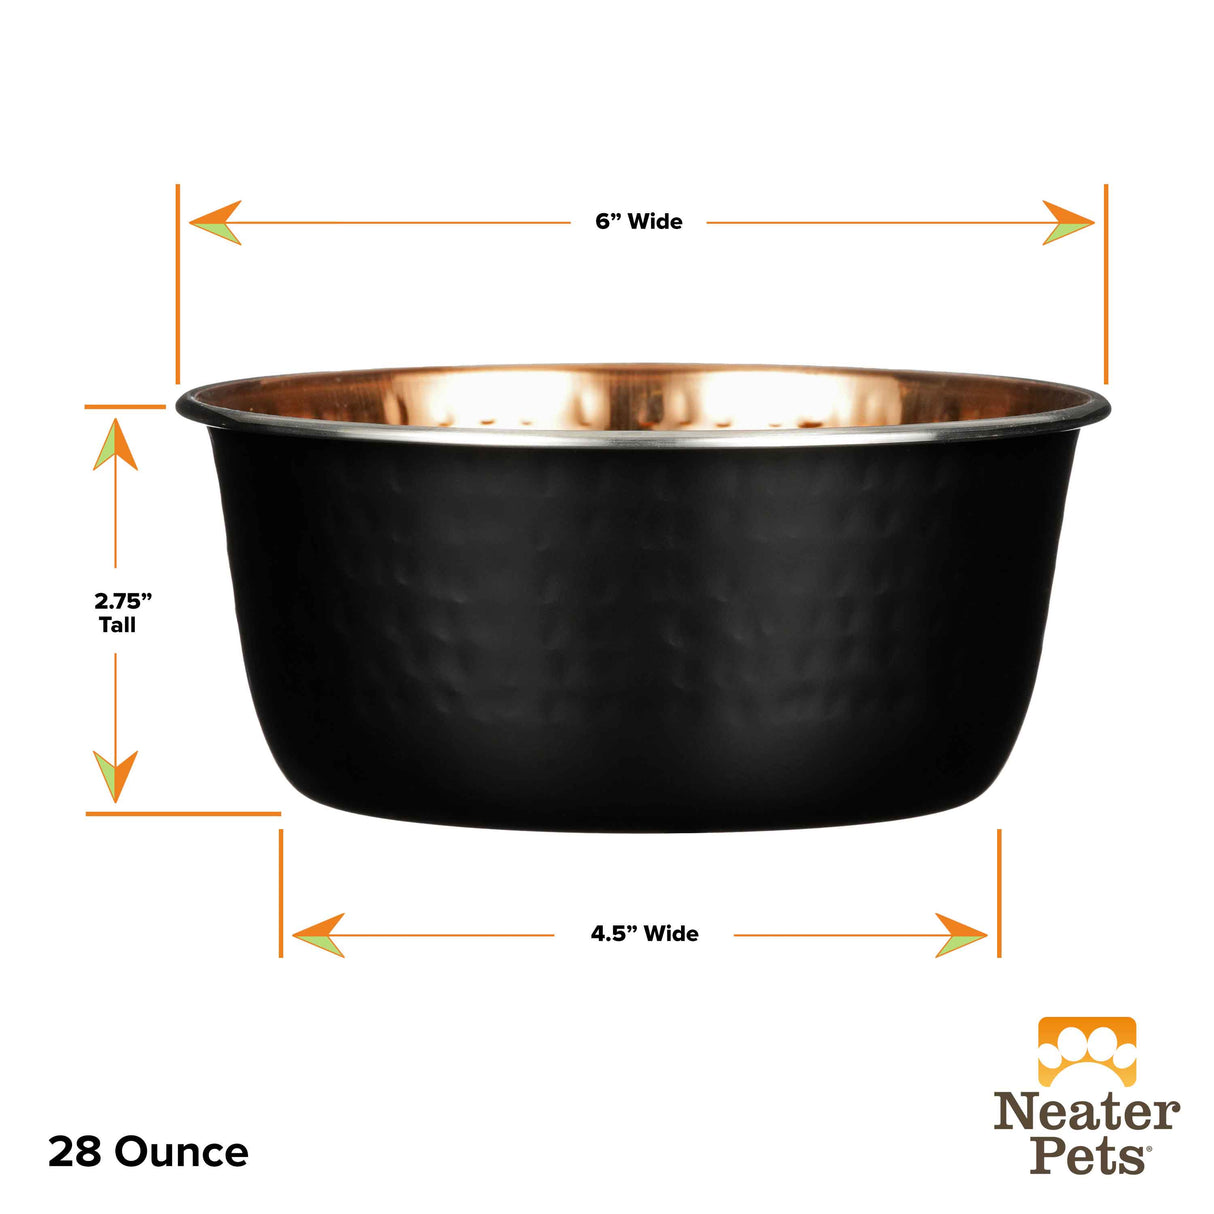 28 ounce sizing guide for Black Hammered Copper Bowl